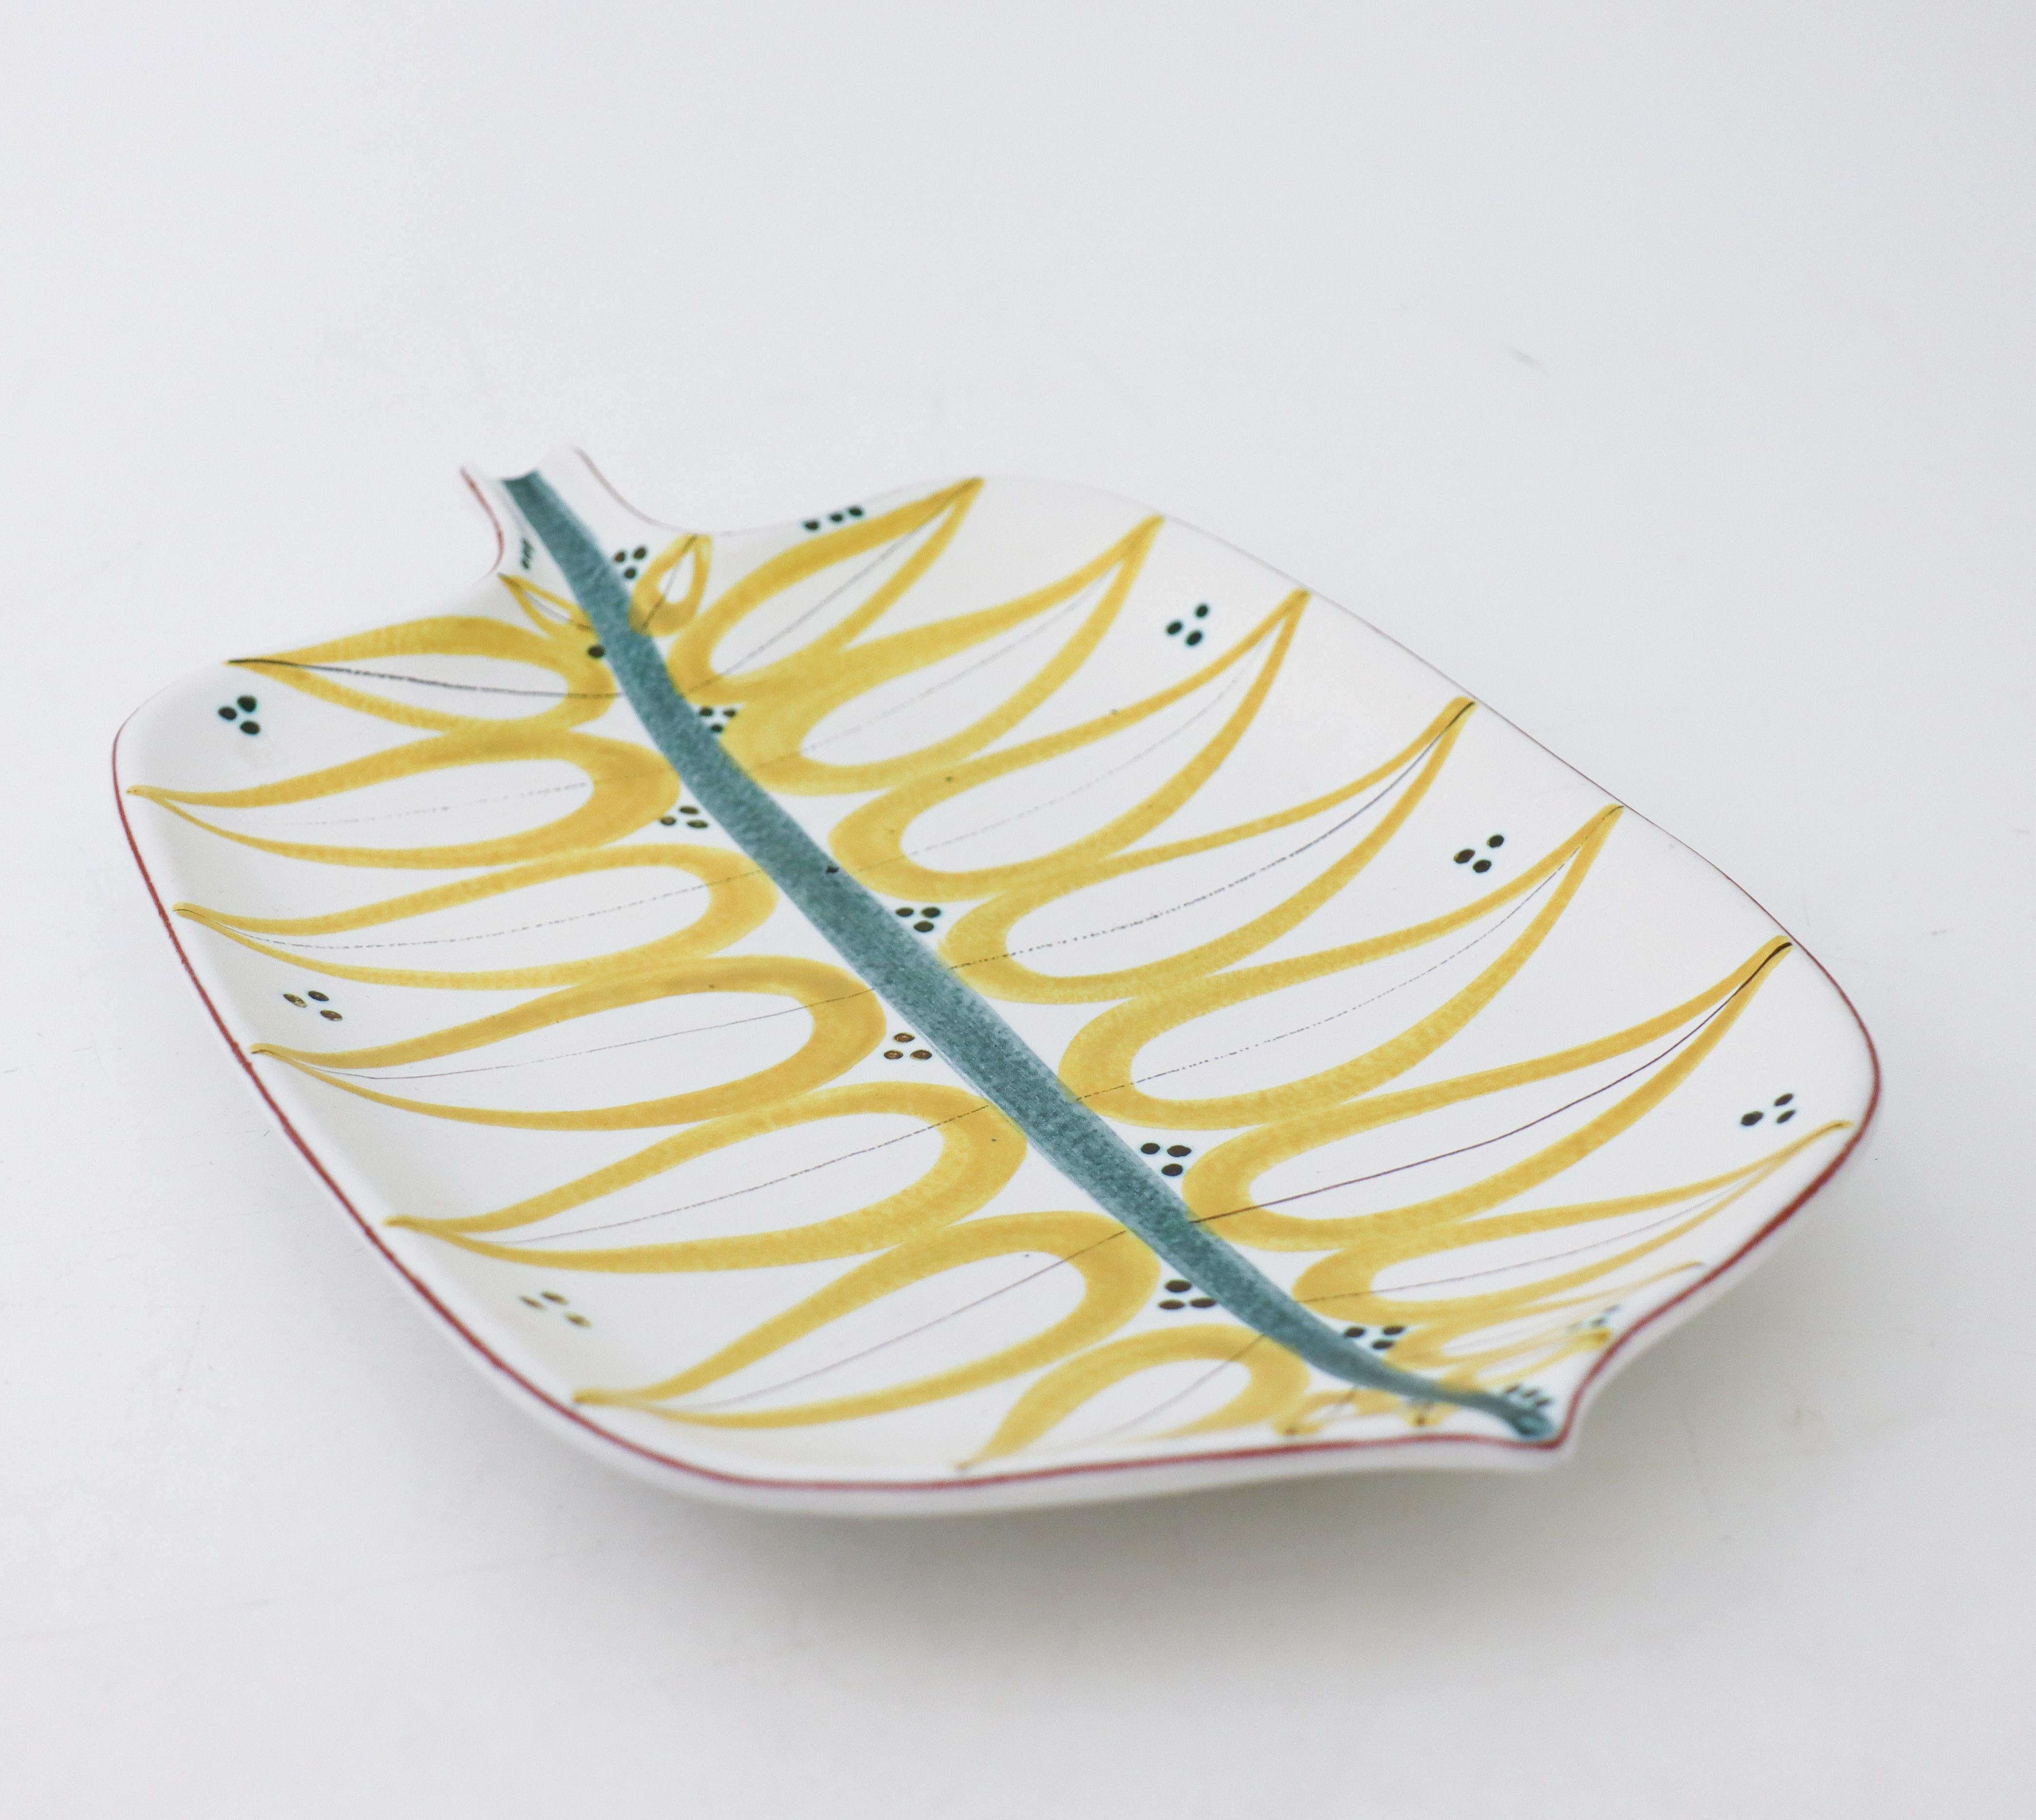 A large dish in faience designed by Stig Lindberg at Gustavsberg Studio, it´s 30 x 19,5 cm (12